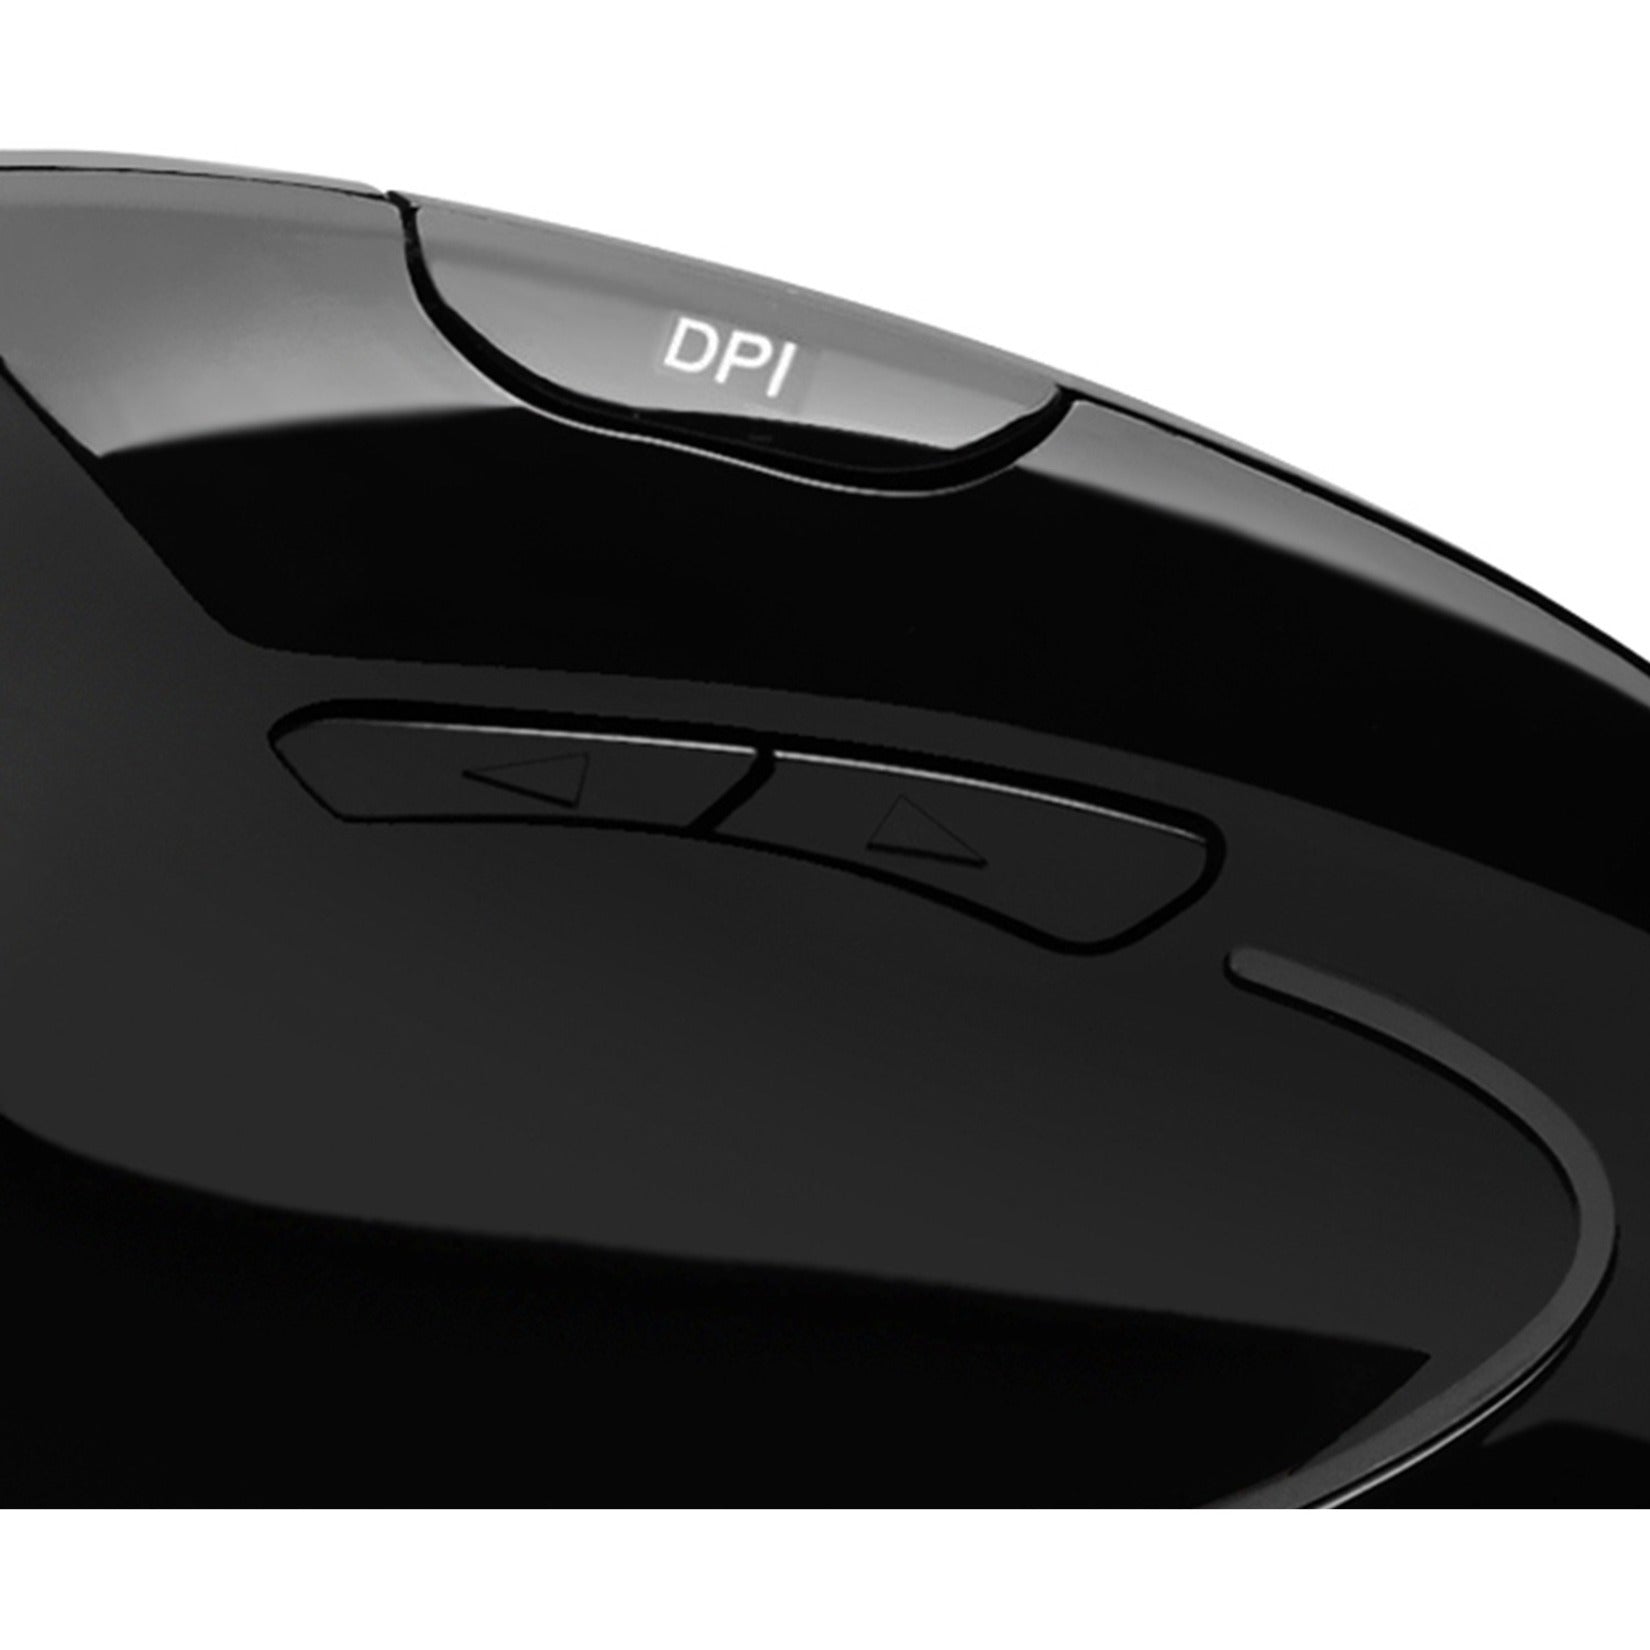 Adesso Left-Handed Vertical Ergonomic Mouse [Discontinued]